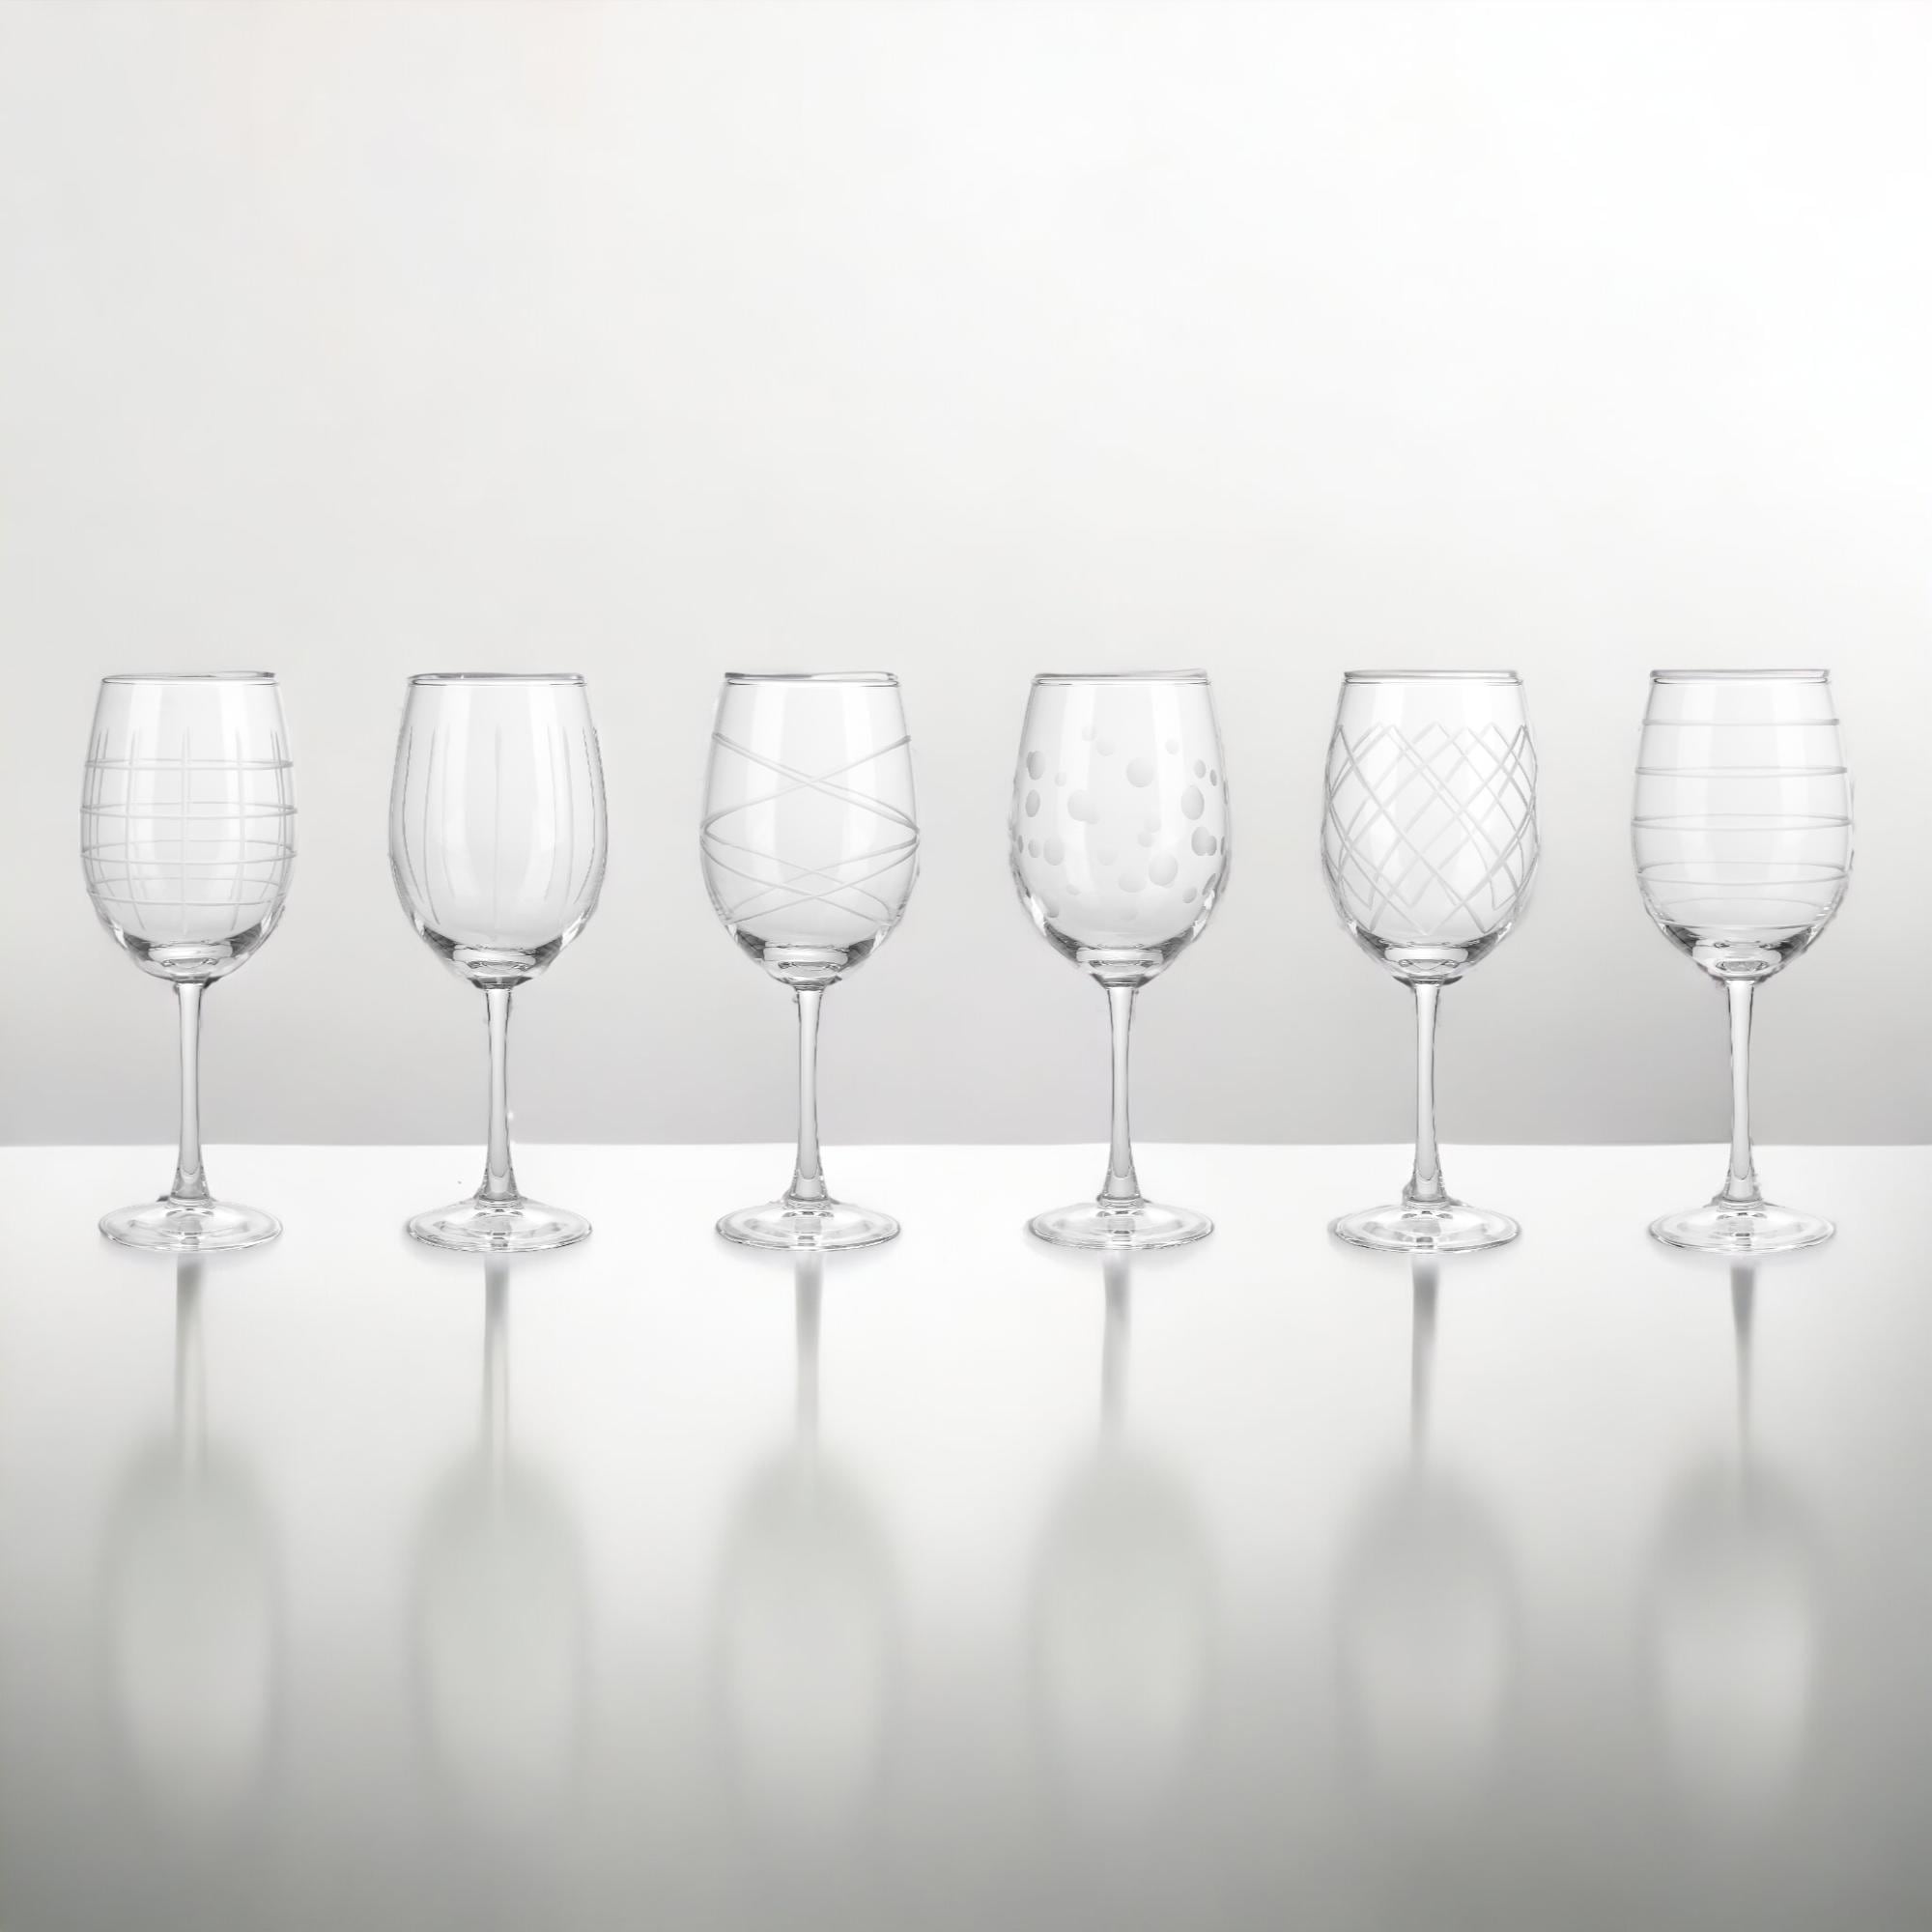 https://ak1.ostkcdn.com/images/products/is/images/direct/7dbc90b9a4685f70b6255ce540ba2d184a422611/Fifth-Avenue-Crystal-Medallion-Wine-Glasses-Set-of-6.jpg